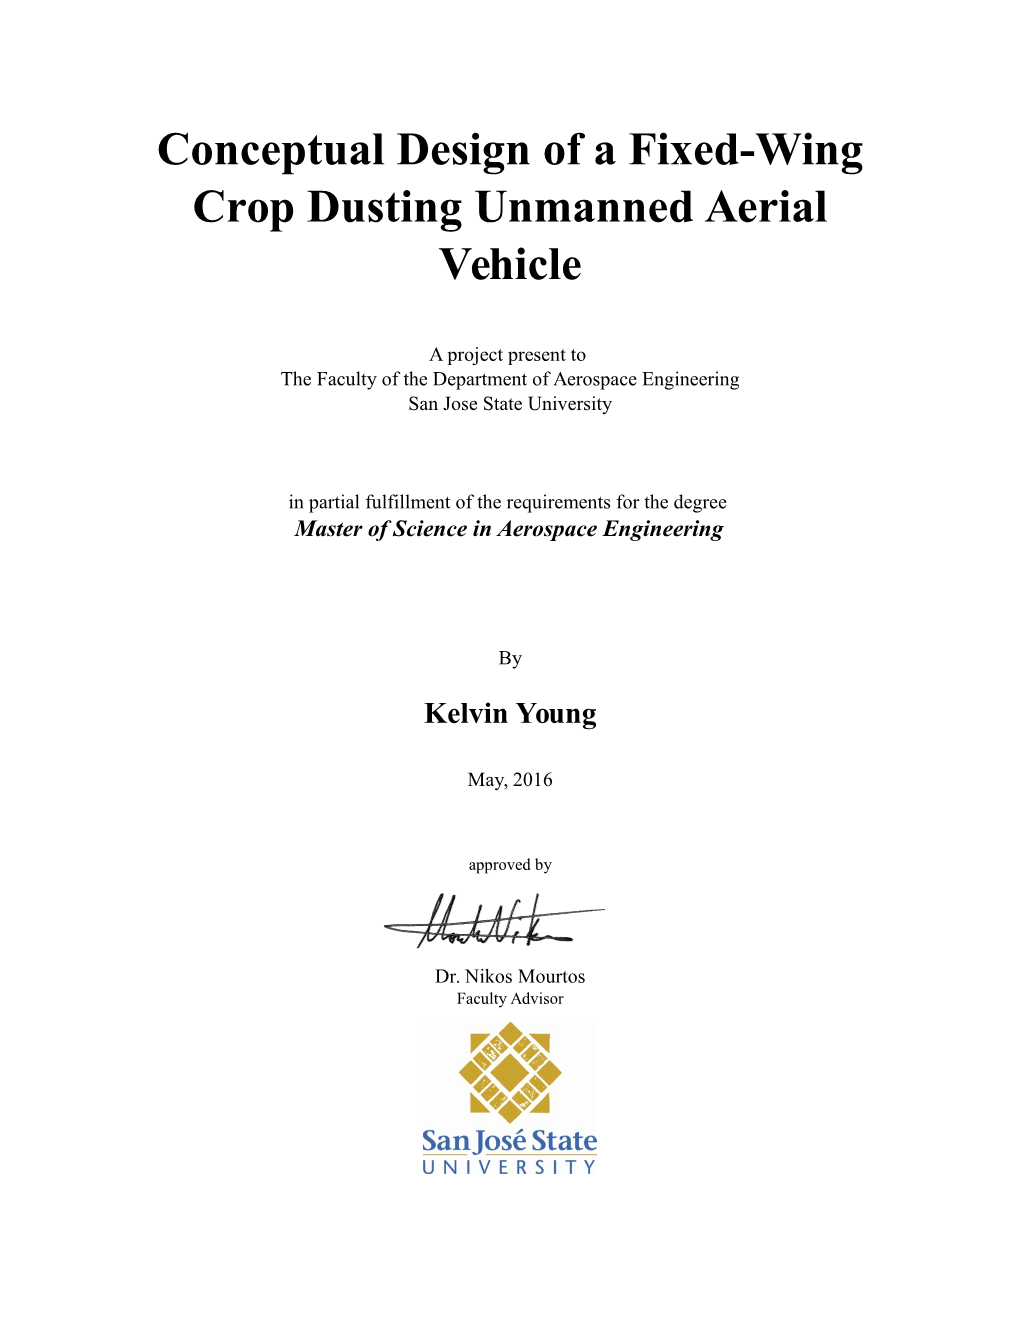 Conceptual Design of a Fixed-Wing Crop Dusting Unmanned Aerial Vehicle